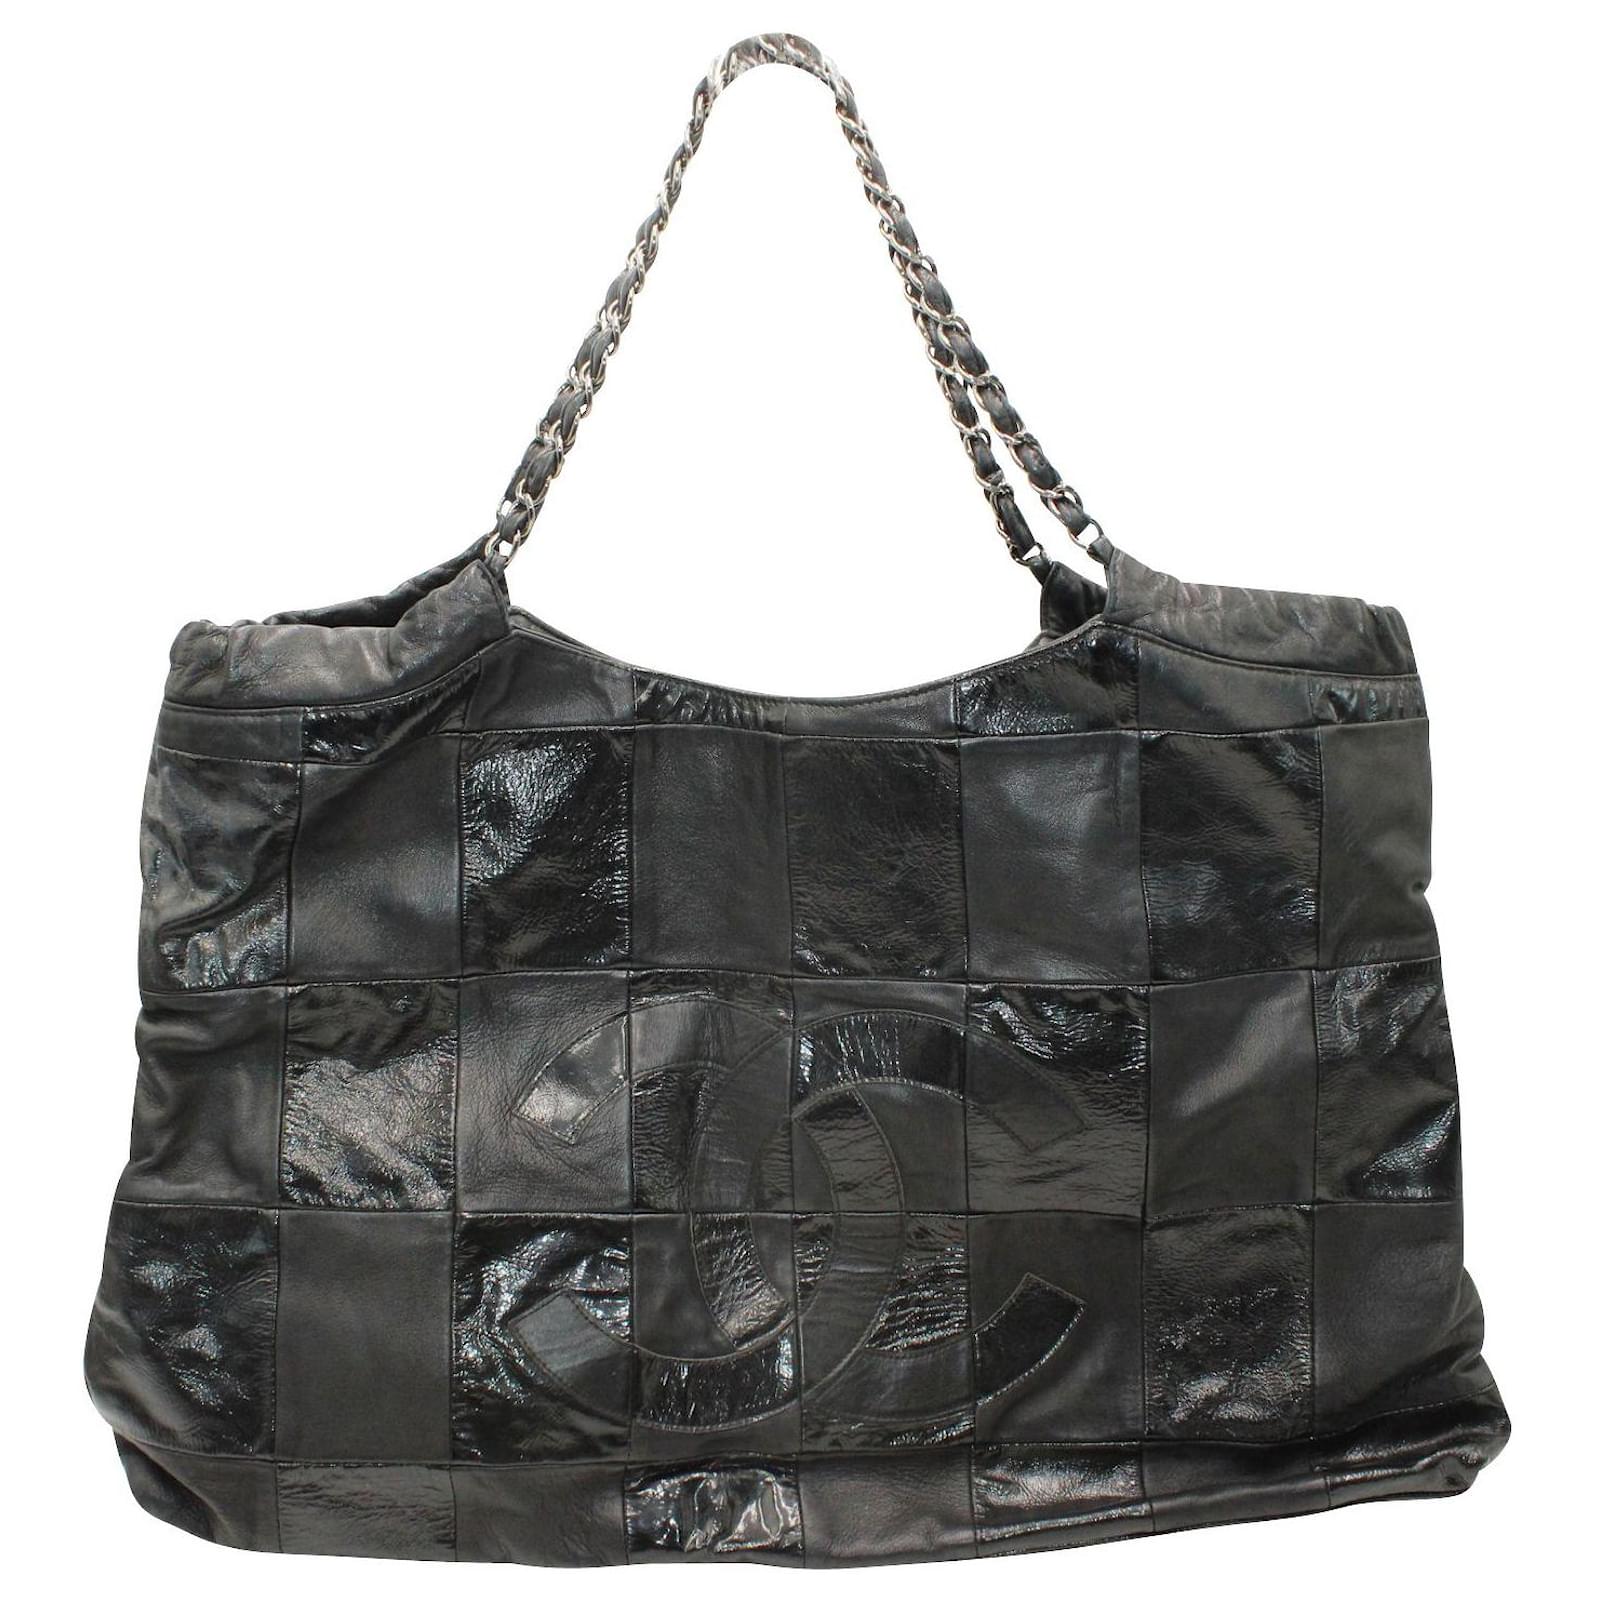 Totes Chanel Black Leather Patchwork Tote with Silver Tone Chain 2013-2014